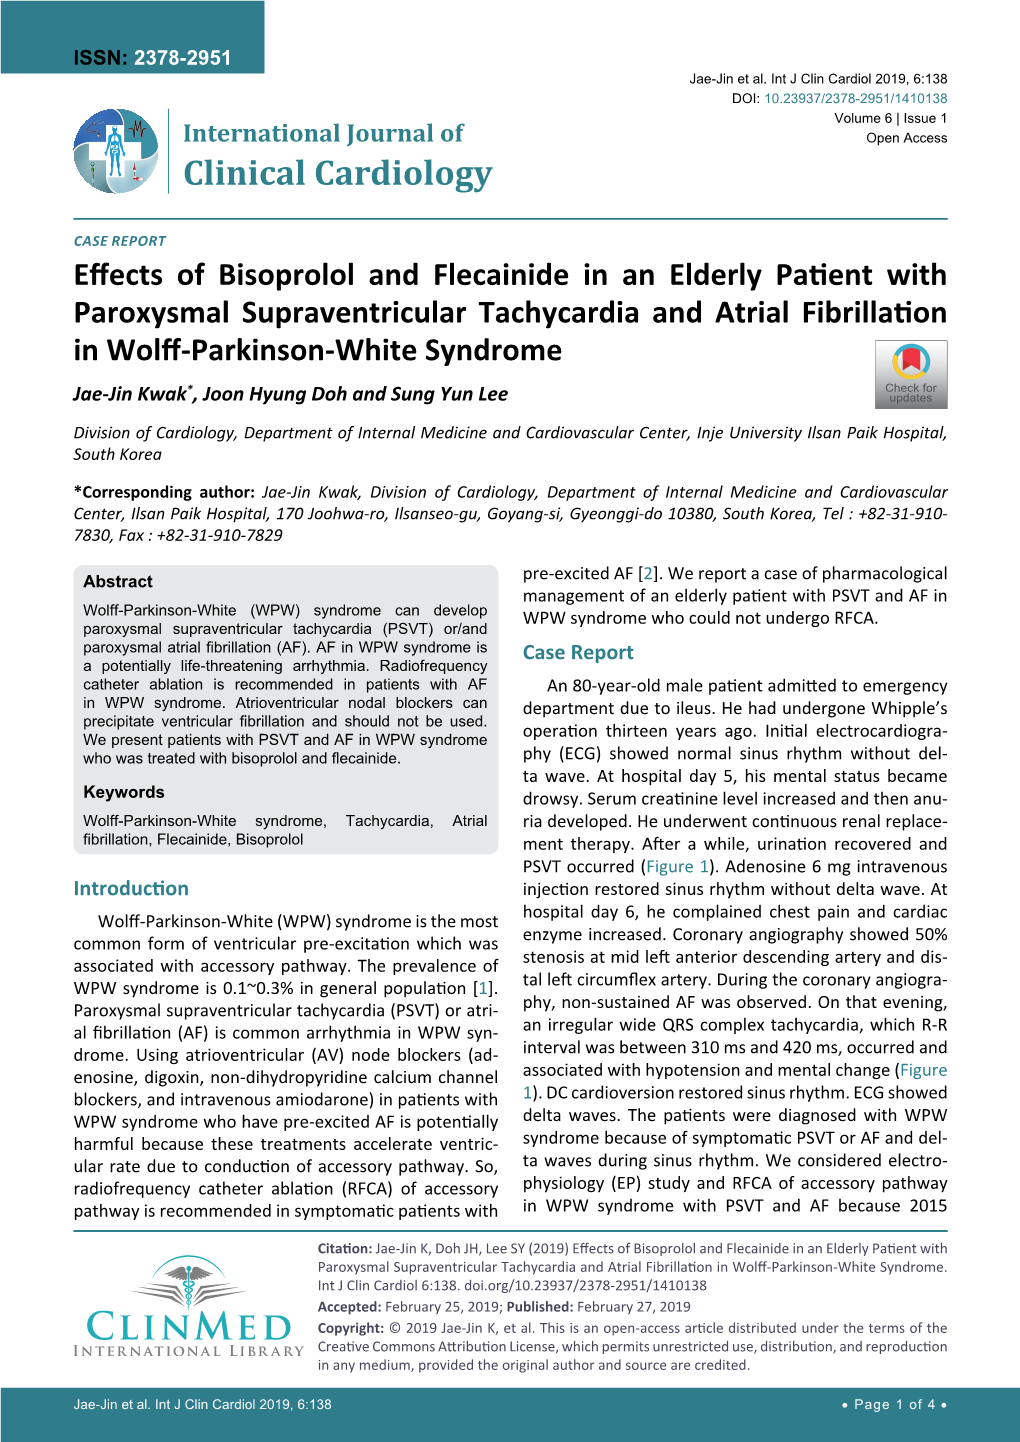 Effects of Bisoprolol and Flecainide in an Elderly Patient with Paroxysmal Supraventricular Tachycardia and Atrial Fibrillation in Wolff-Parkinson-White Syndrome